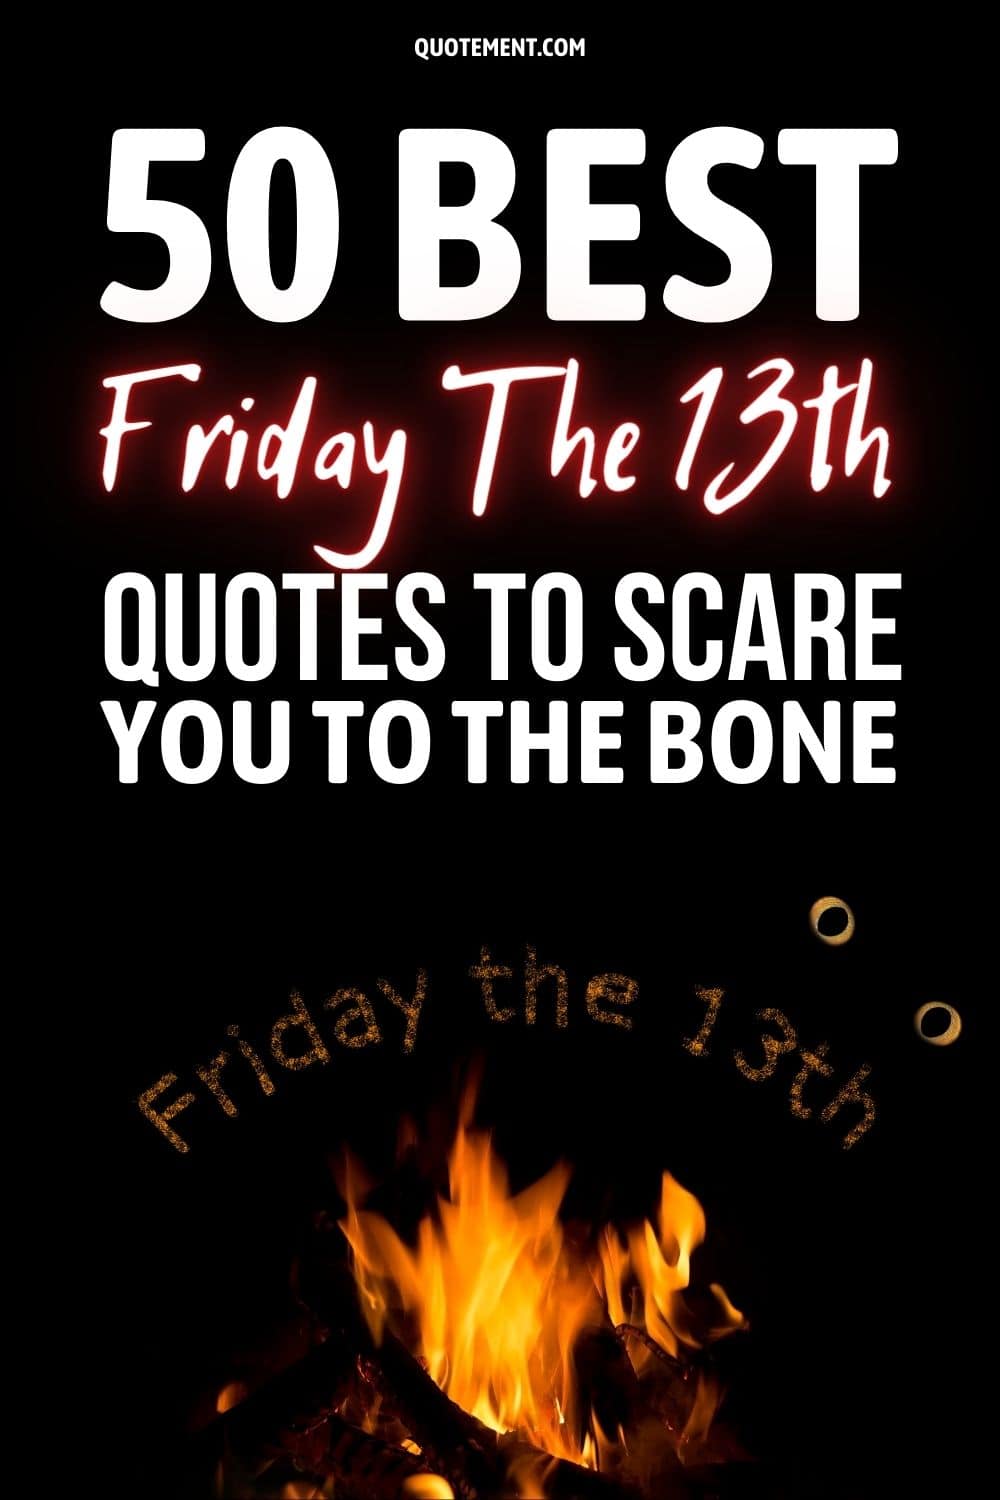 50 Best Friday The 13th Quotes To Scare You To The Bone
